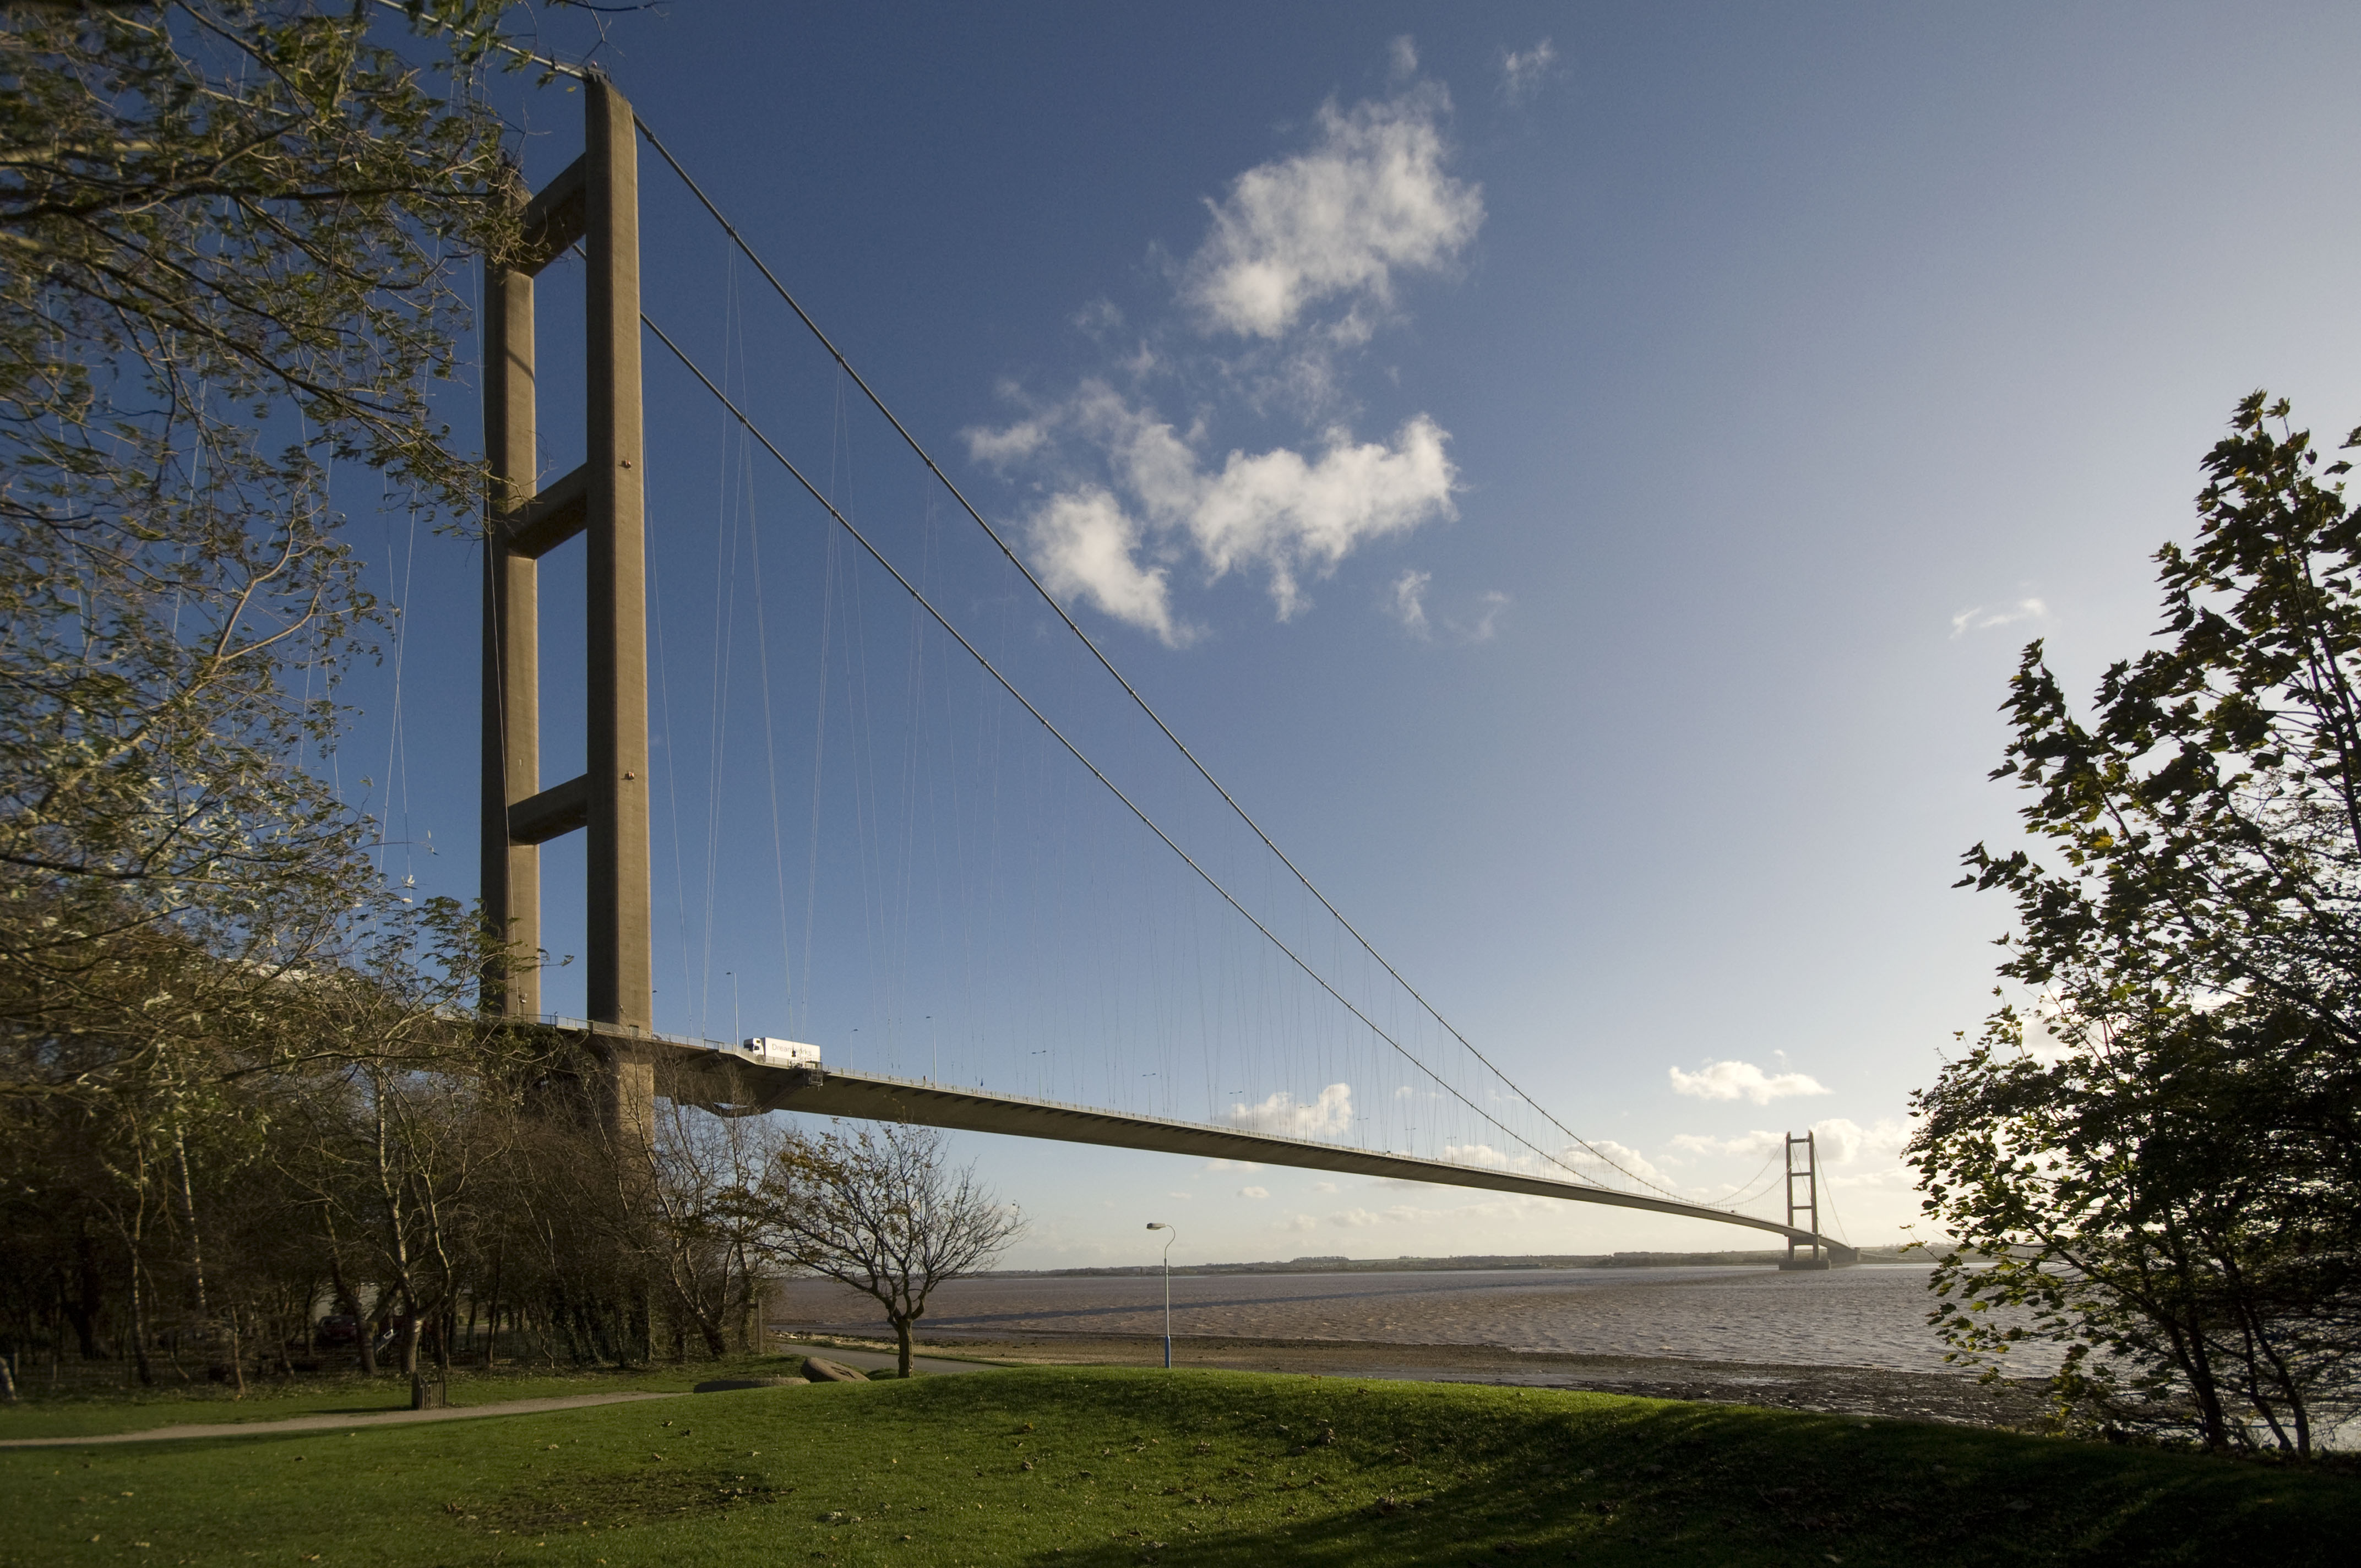 The Humber bridge is now Grade I listed